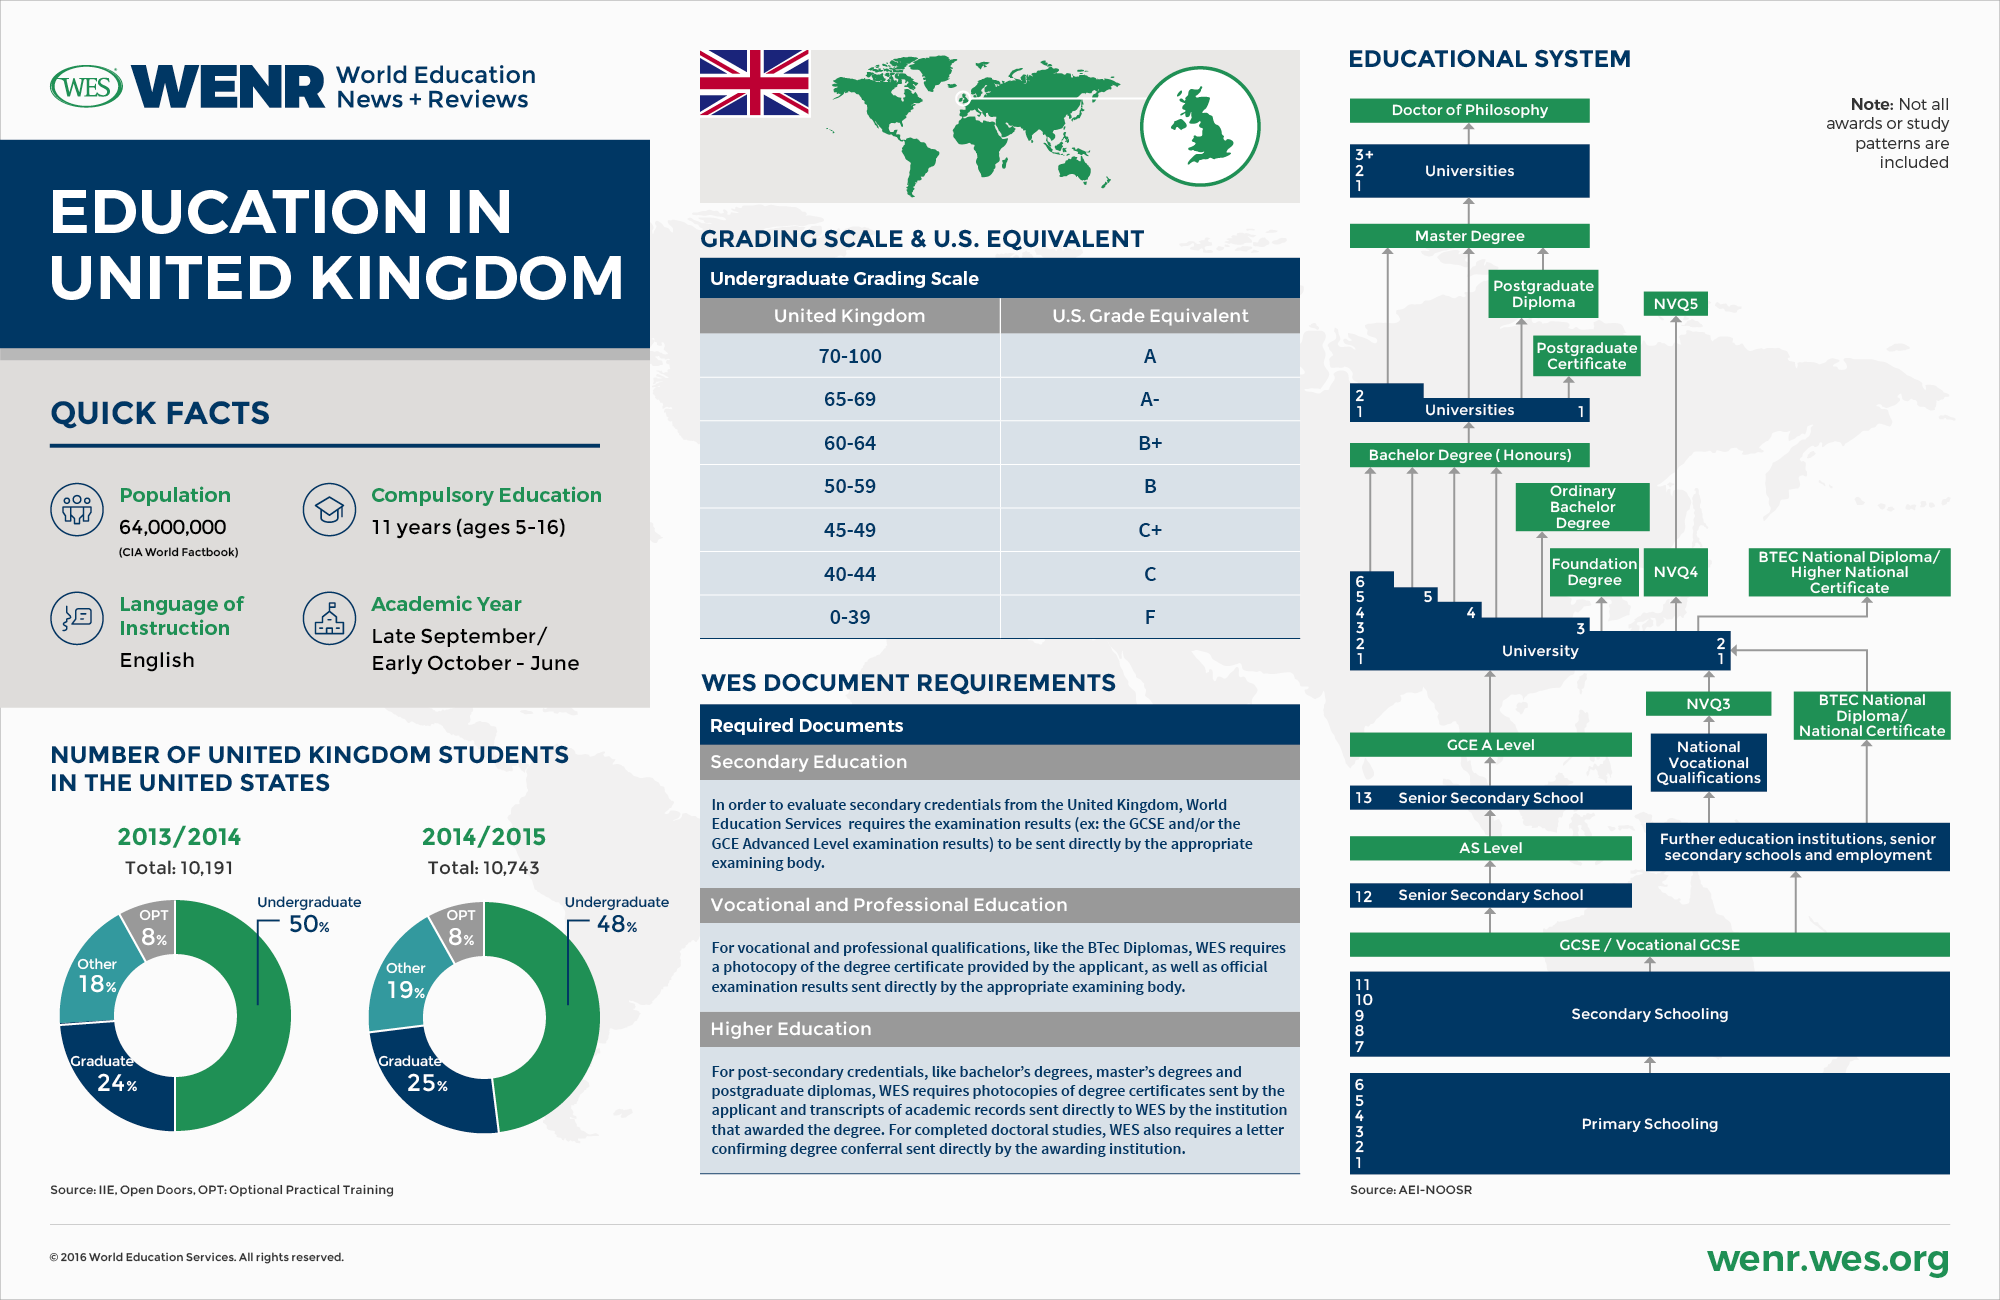 An infographic with fasts about the United Kingdom's educational system and international student mobility landscape. 